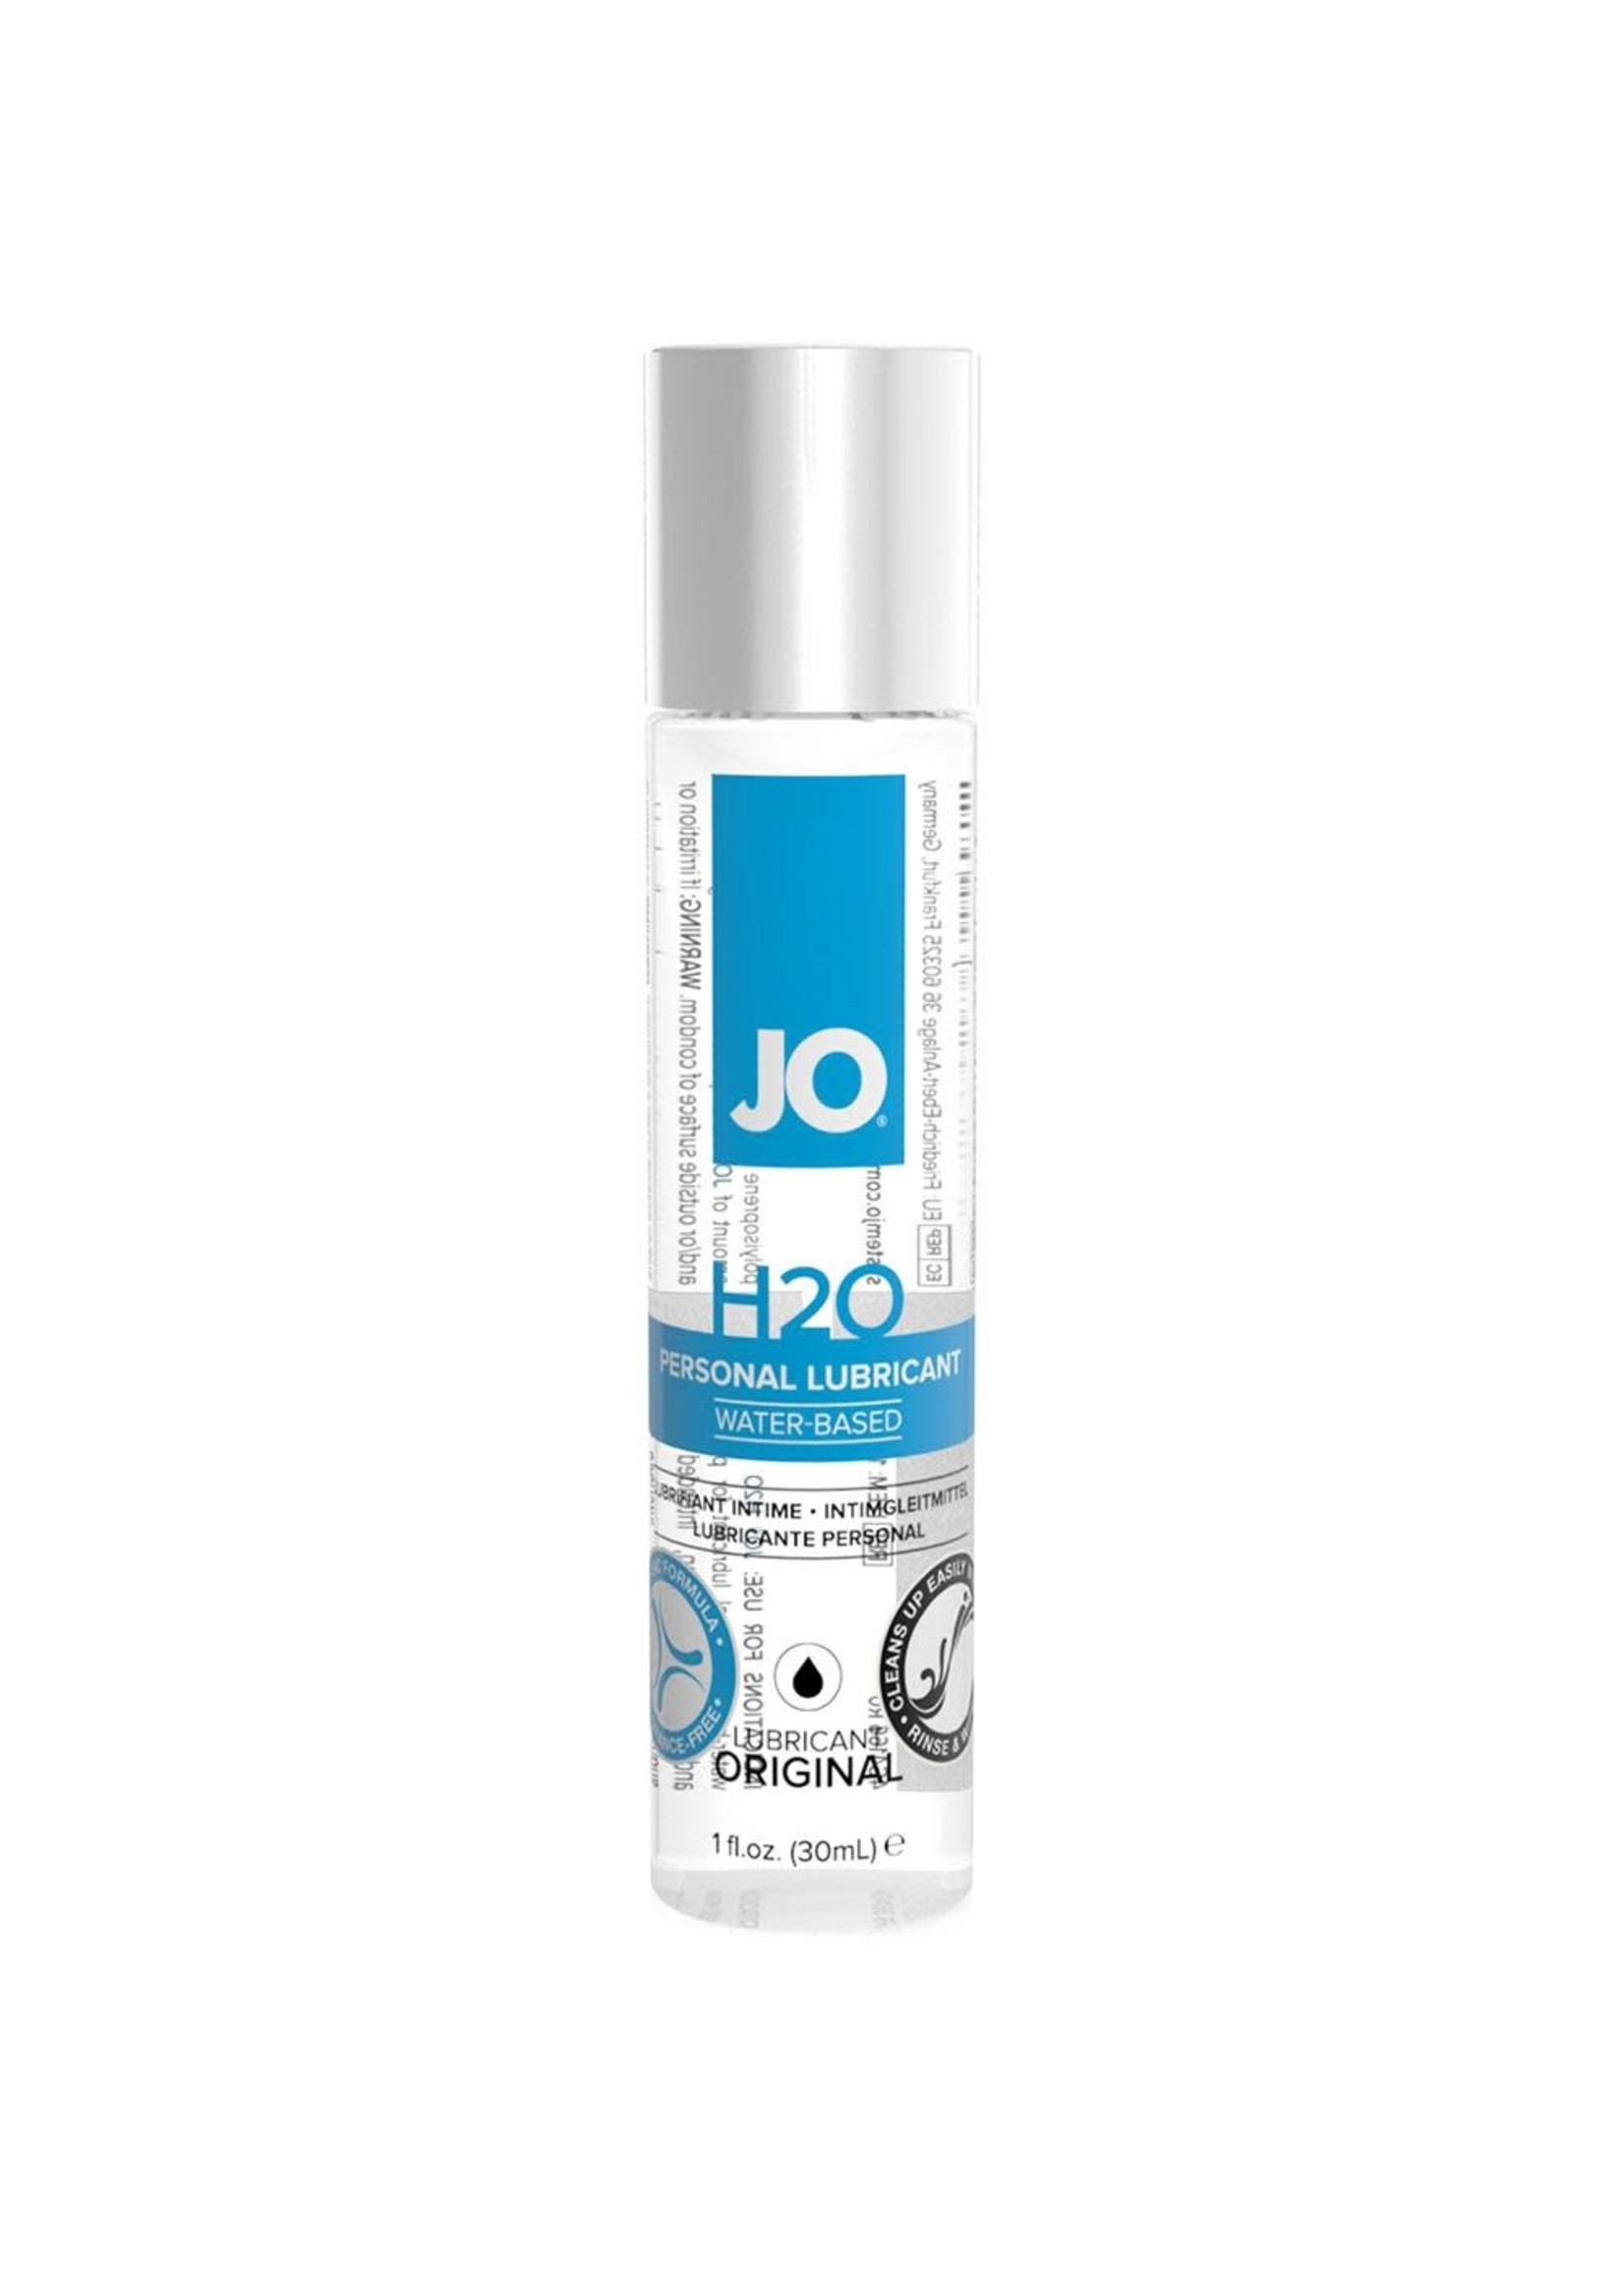 JO H2O Water Based Personal Lubricant in 1oz/30ml